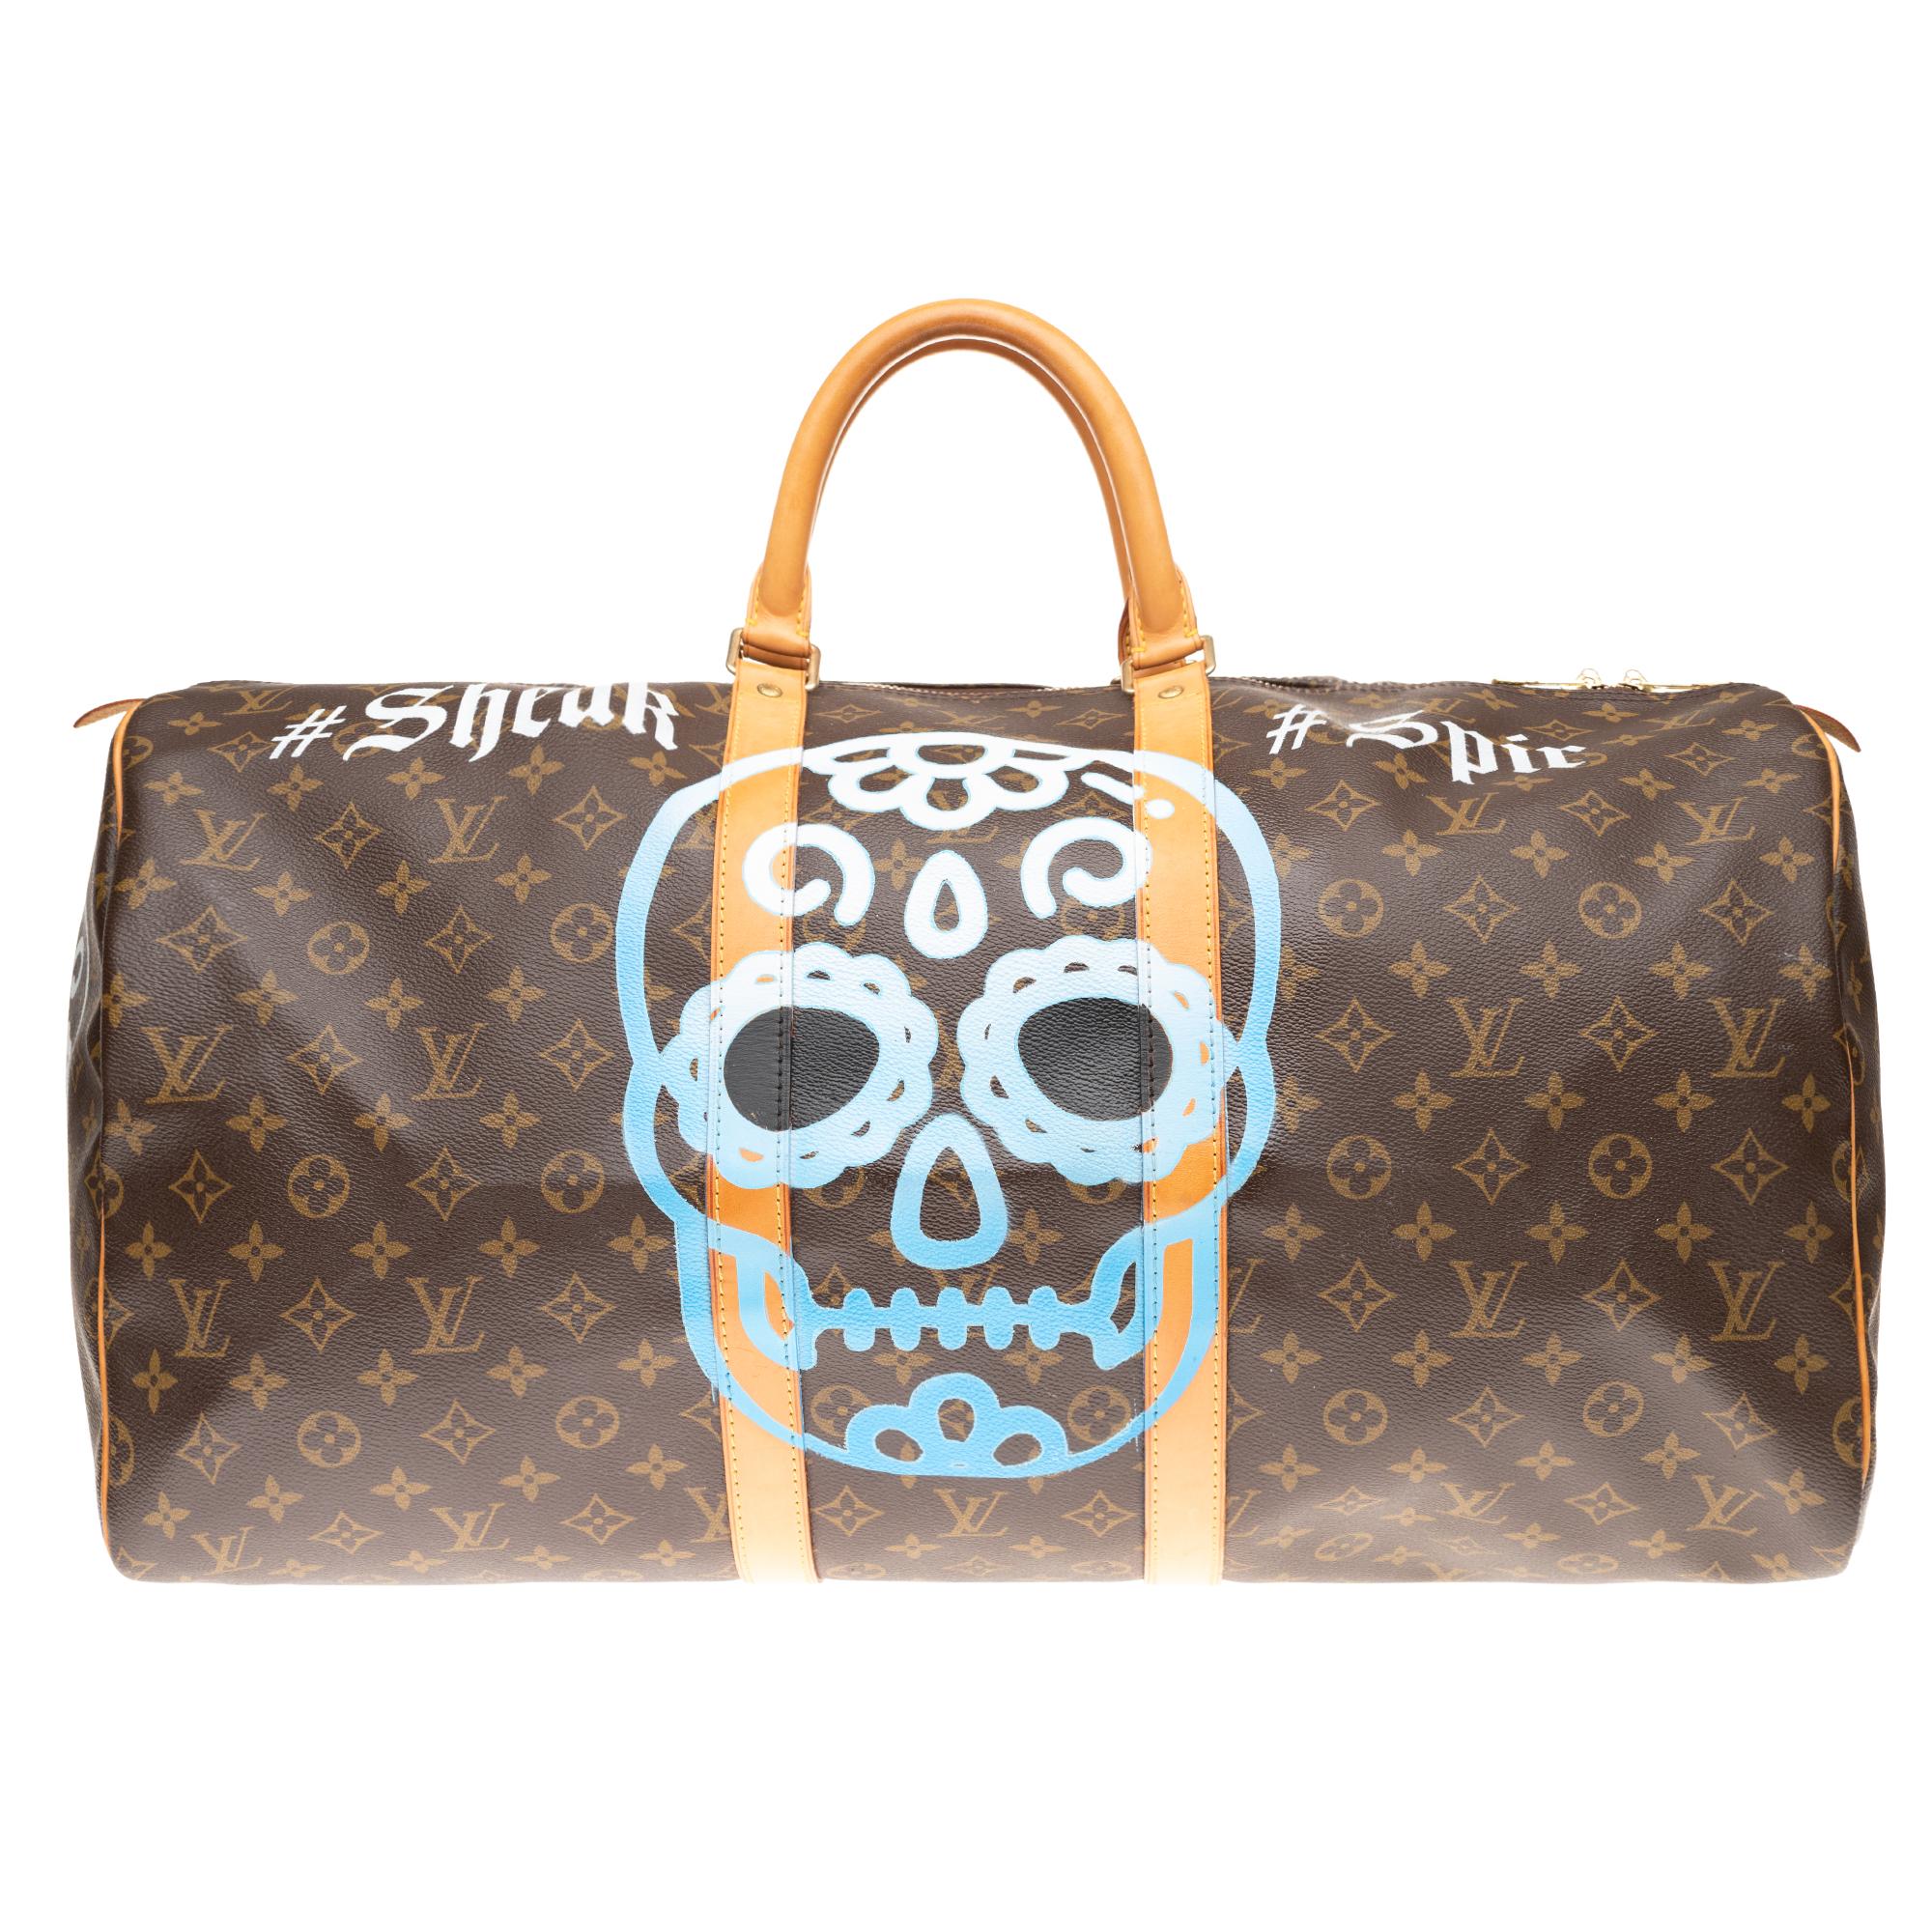 Exceptional travel bag Louis Vuitton Keepall 55 cm in monogram brown canvas and natural leather personalized by our Street Art artist Patbo on the theme of 